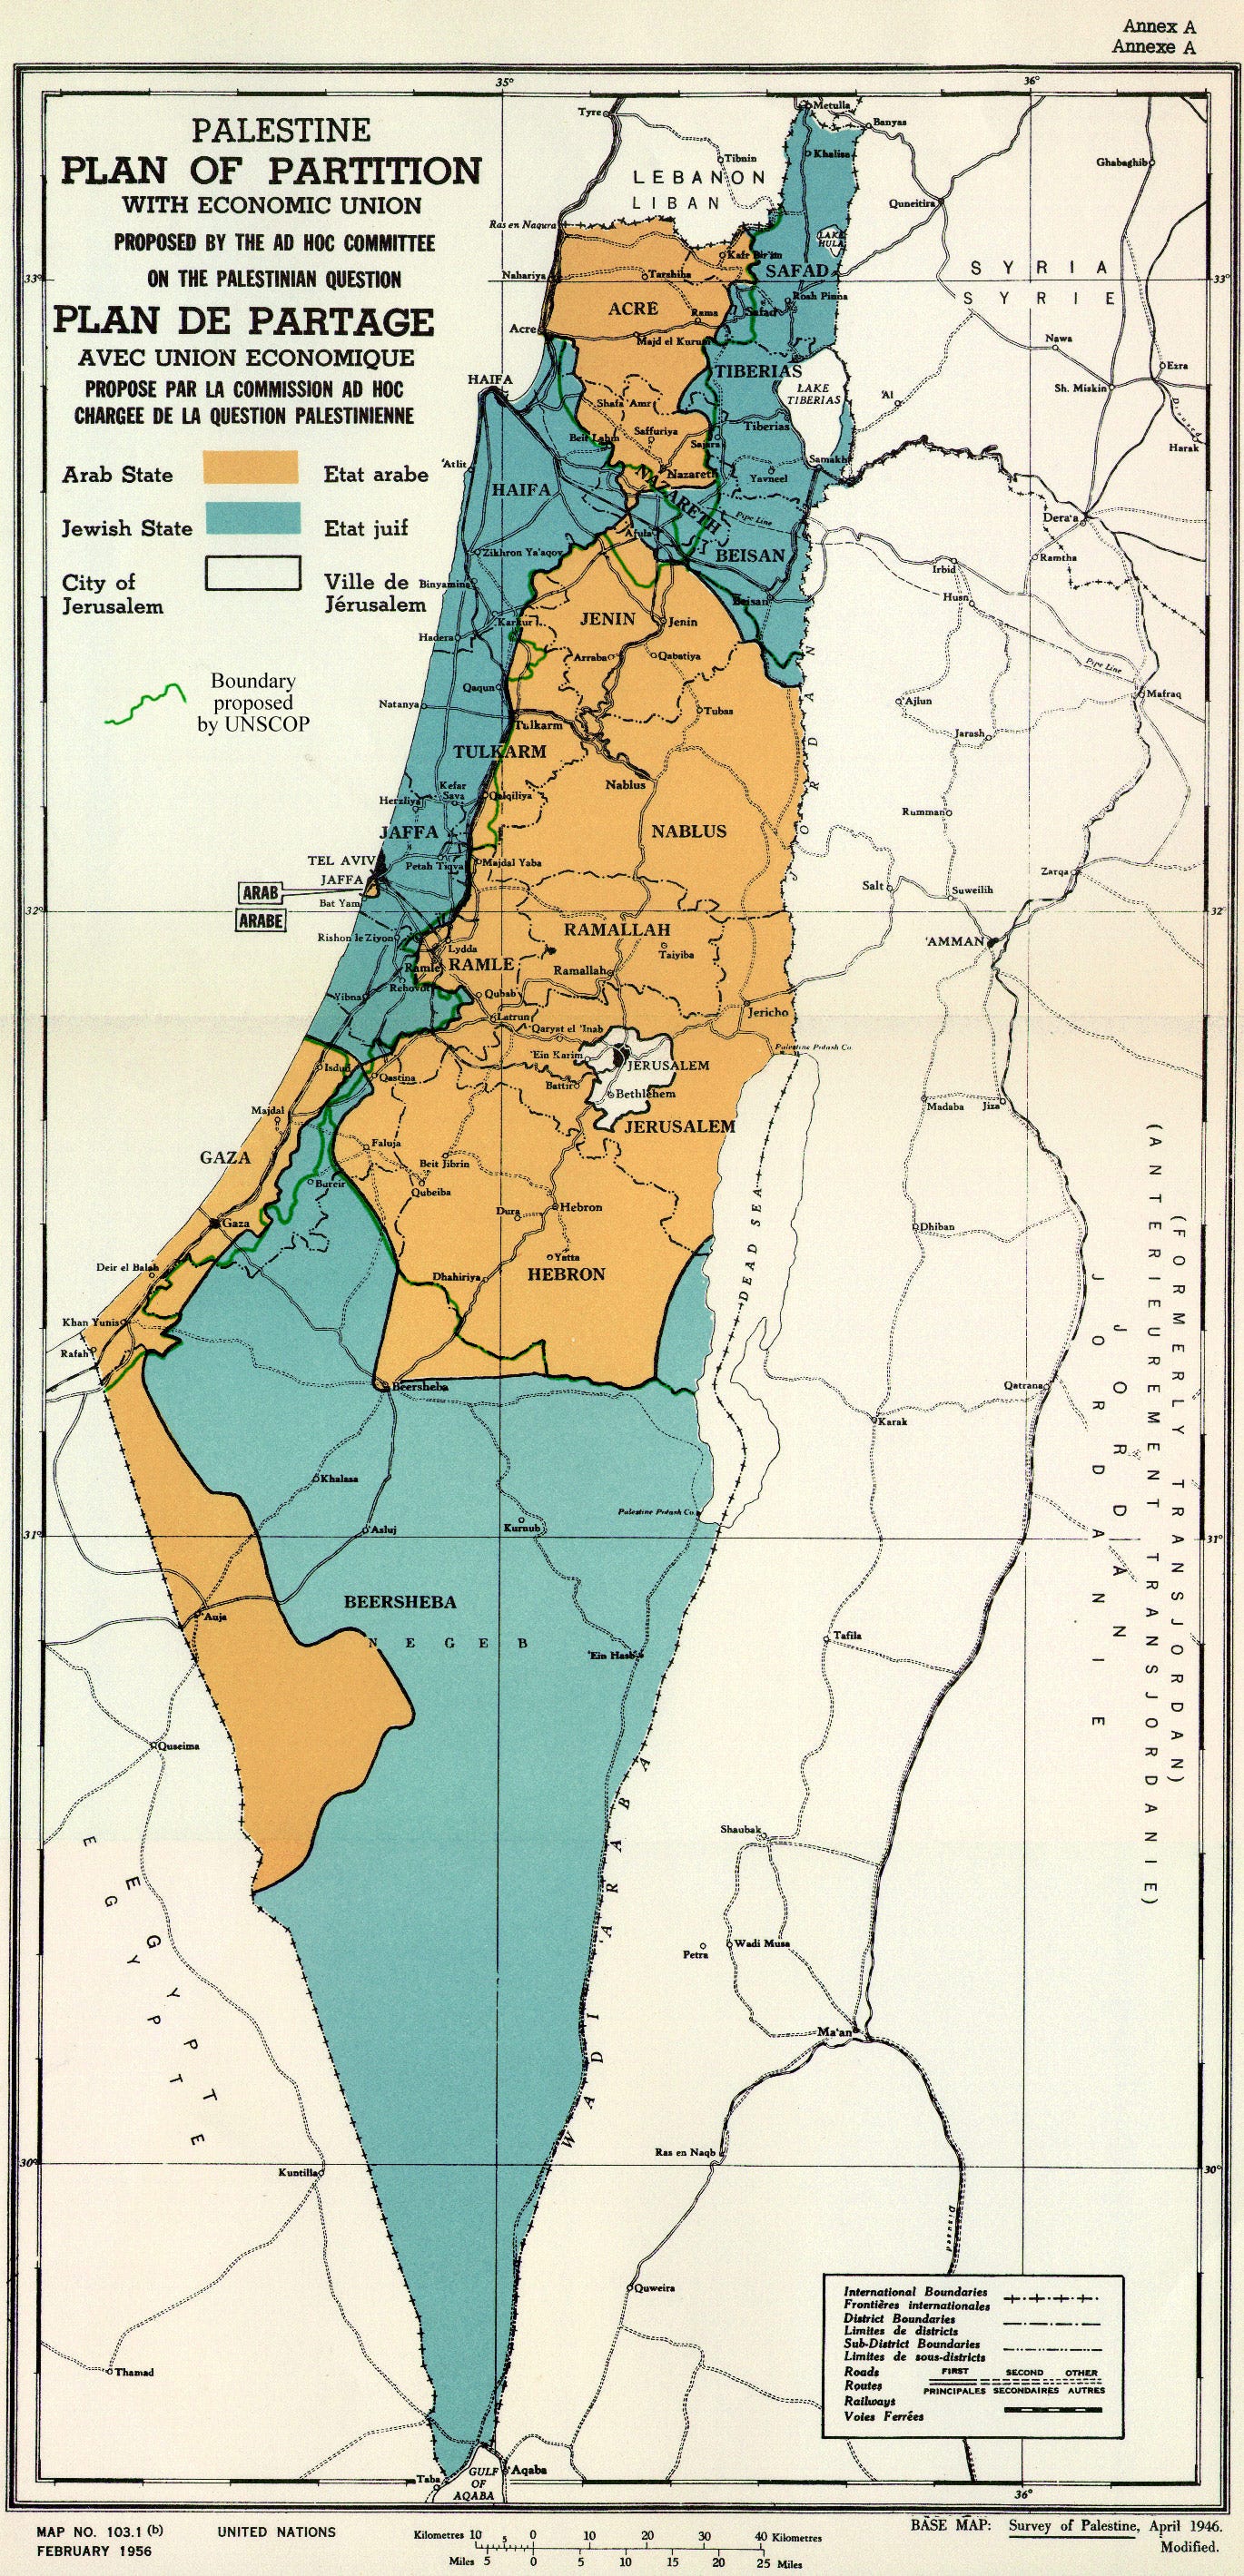 United Nations Partition Plan for Palestine - Wikipedia